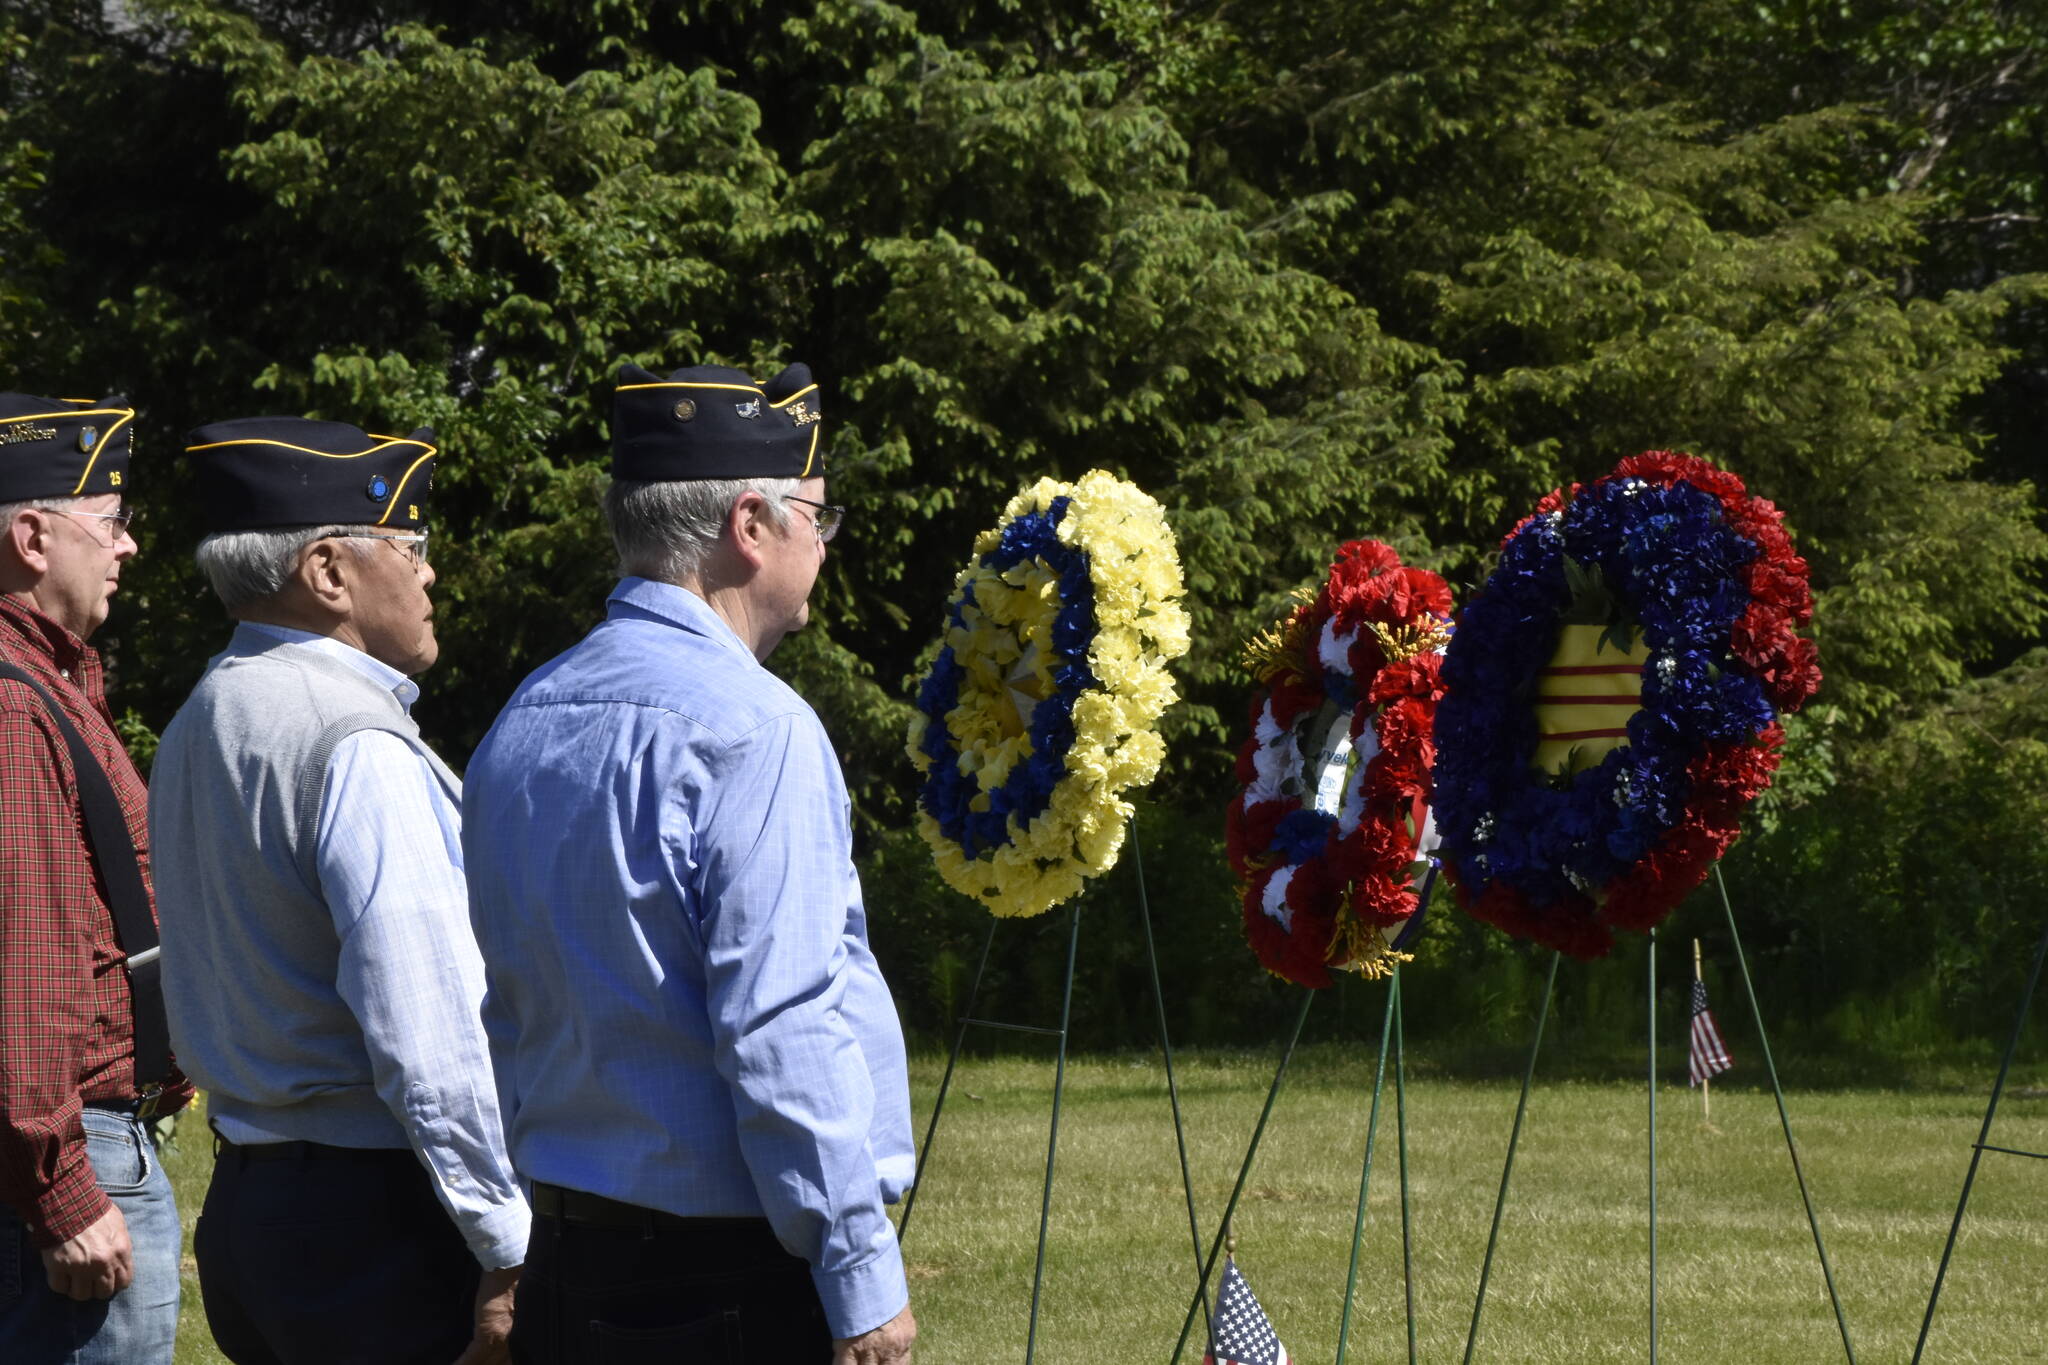 From left to right, William Clutton, Ed Grant, and Bill Morris, lay wreaths at a Memorial Day ceremony at the Alaska Memorial Park in the Mendenhall Valley on Monday, May 30, 2022. (Peter Segall / Juneau Empire)